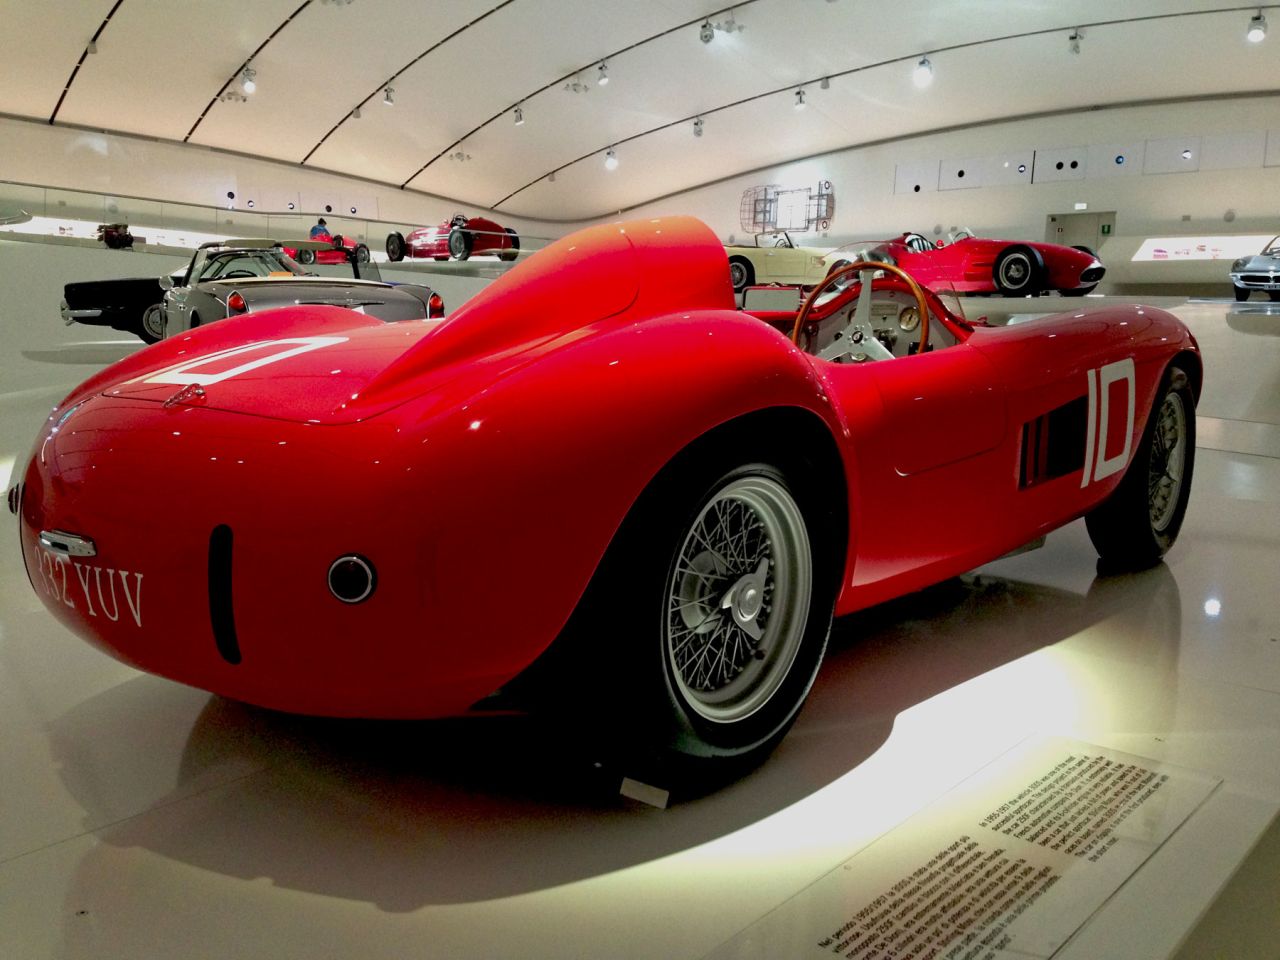 A 1955 Maserati 300 S at the Enzo Ferrari Museum. The museum is, until January 2015, given over to an exhibition of 100 years of Maserati.